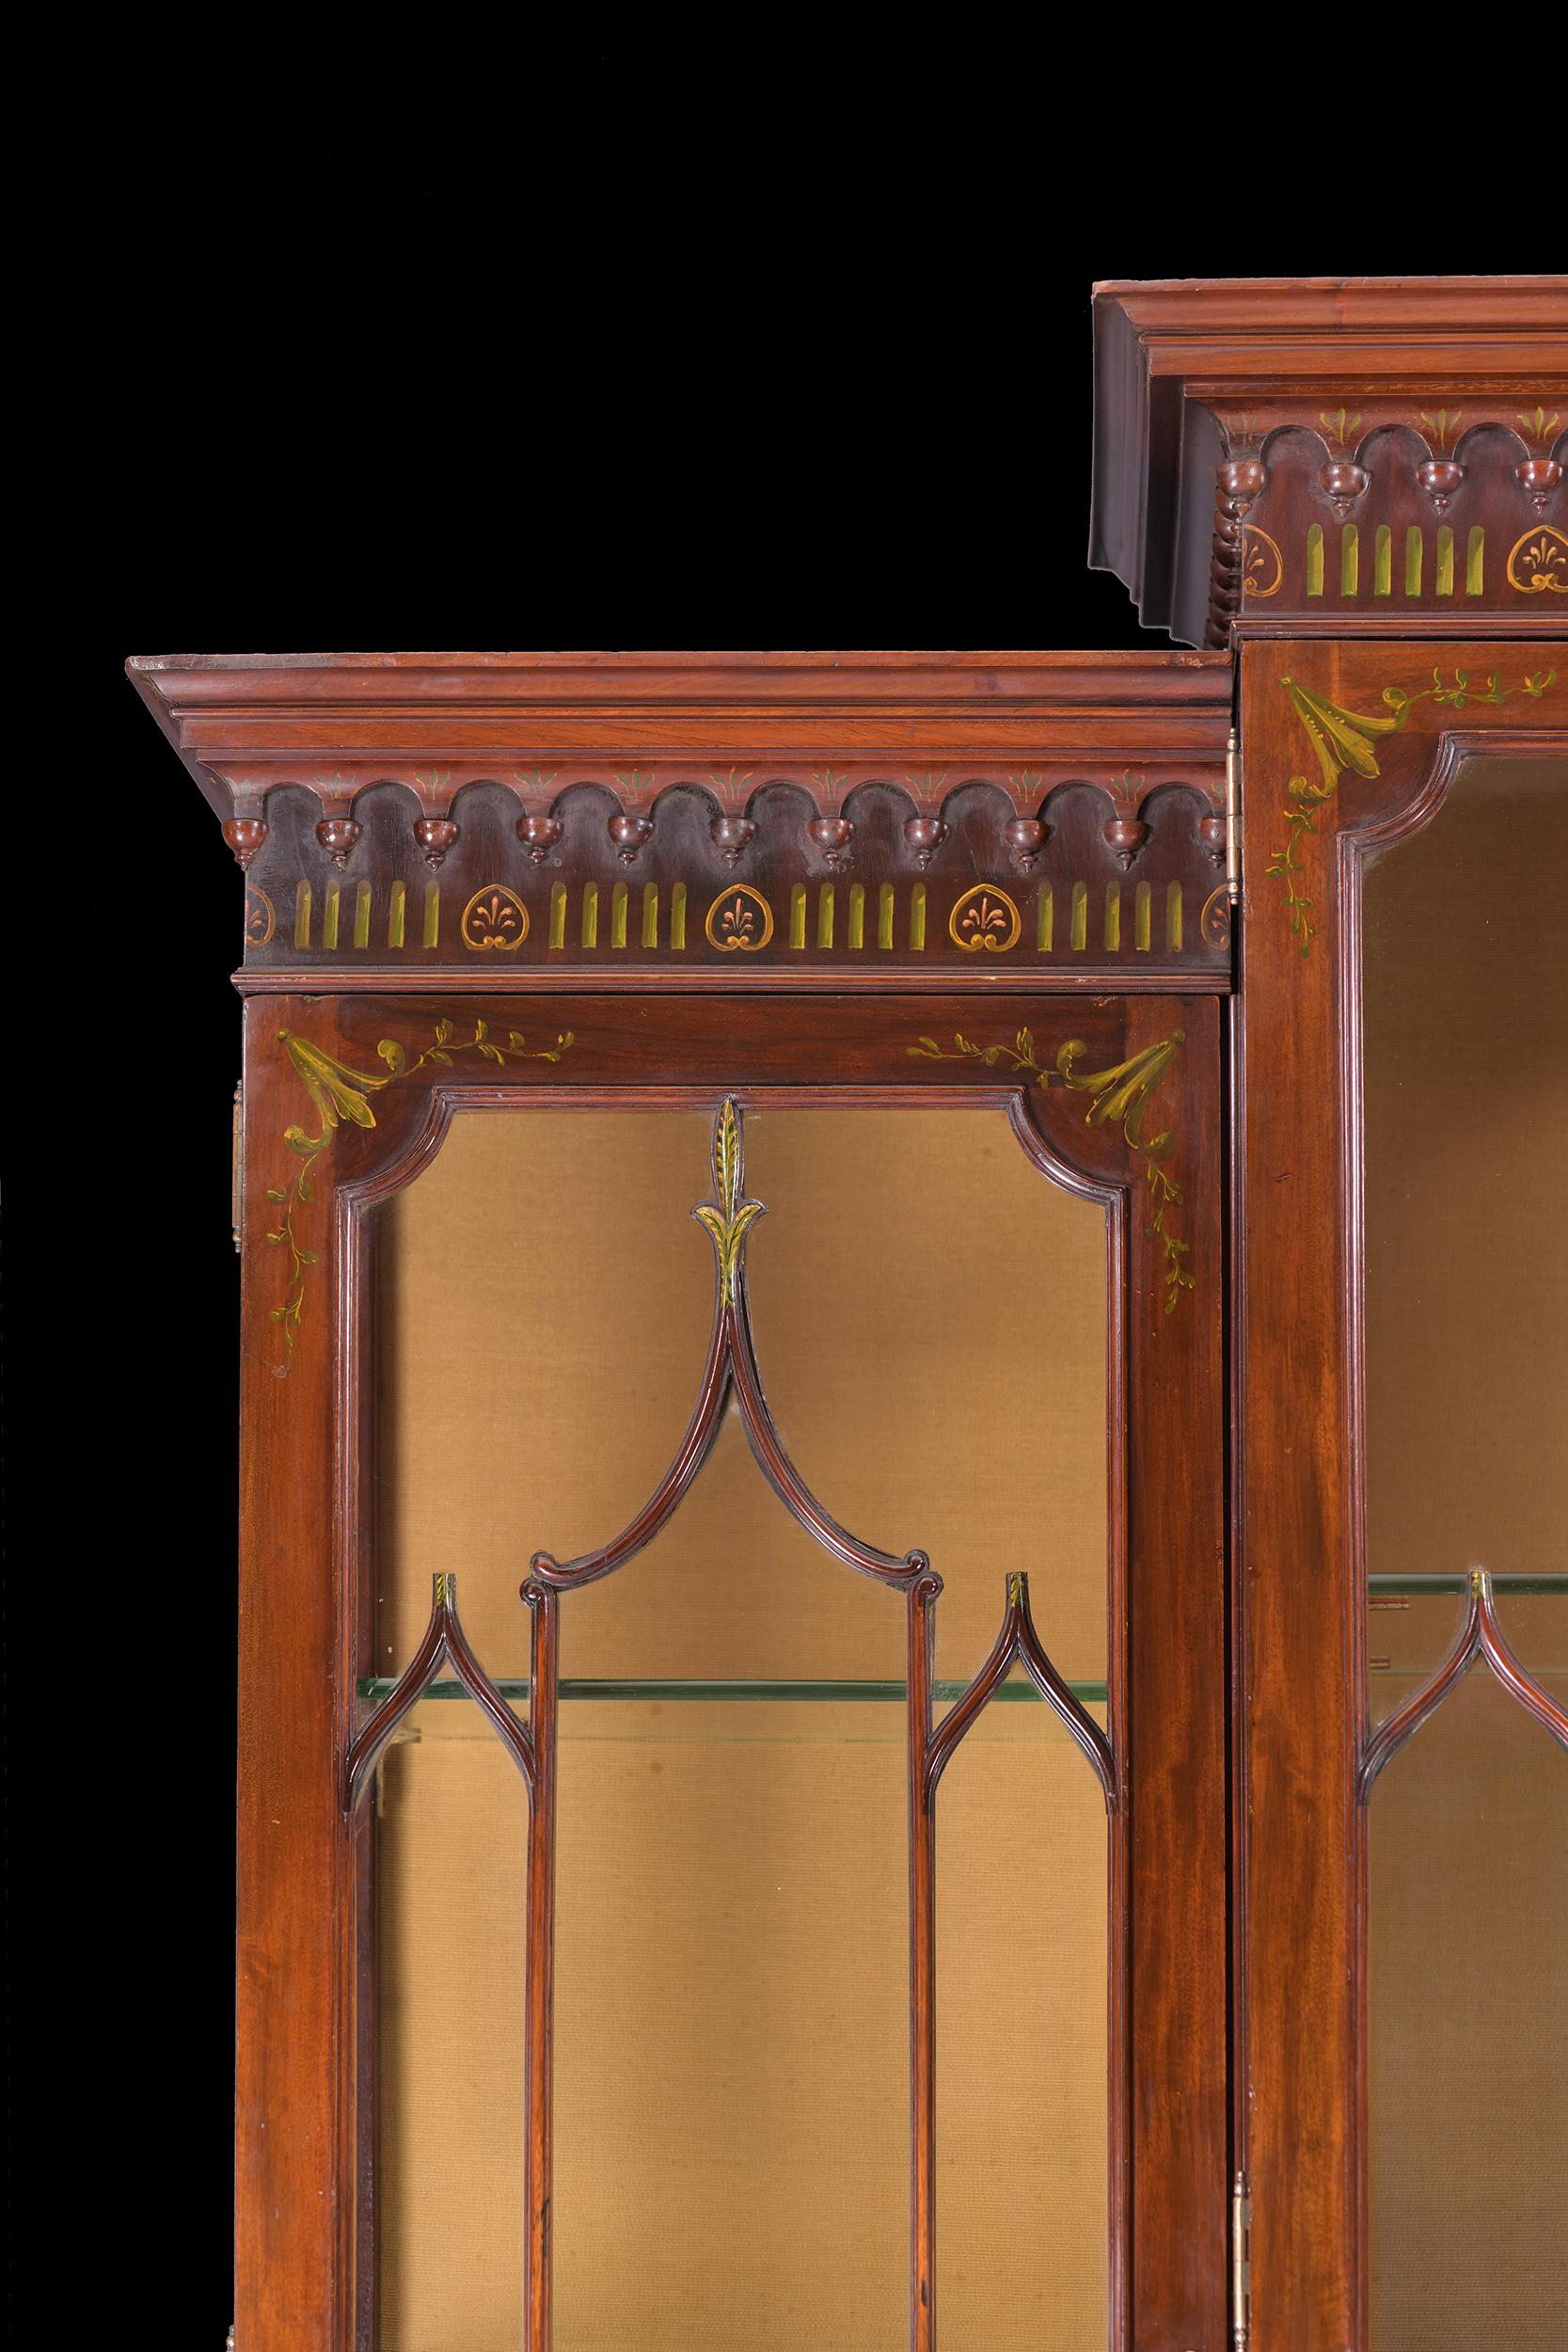 Neoclassical Revival 19th Century English Display Cabinet in the Neo-Classical Style For Sale